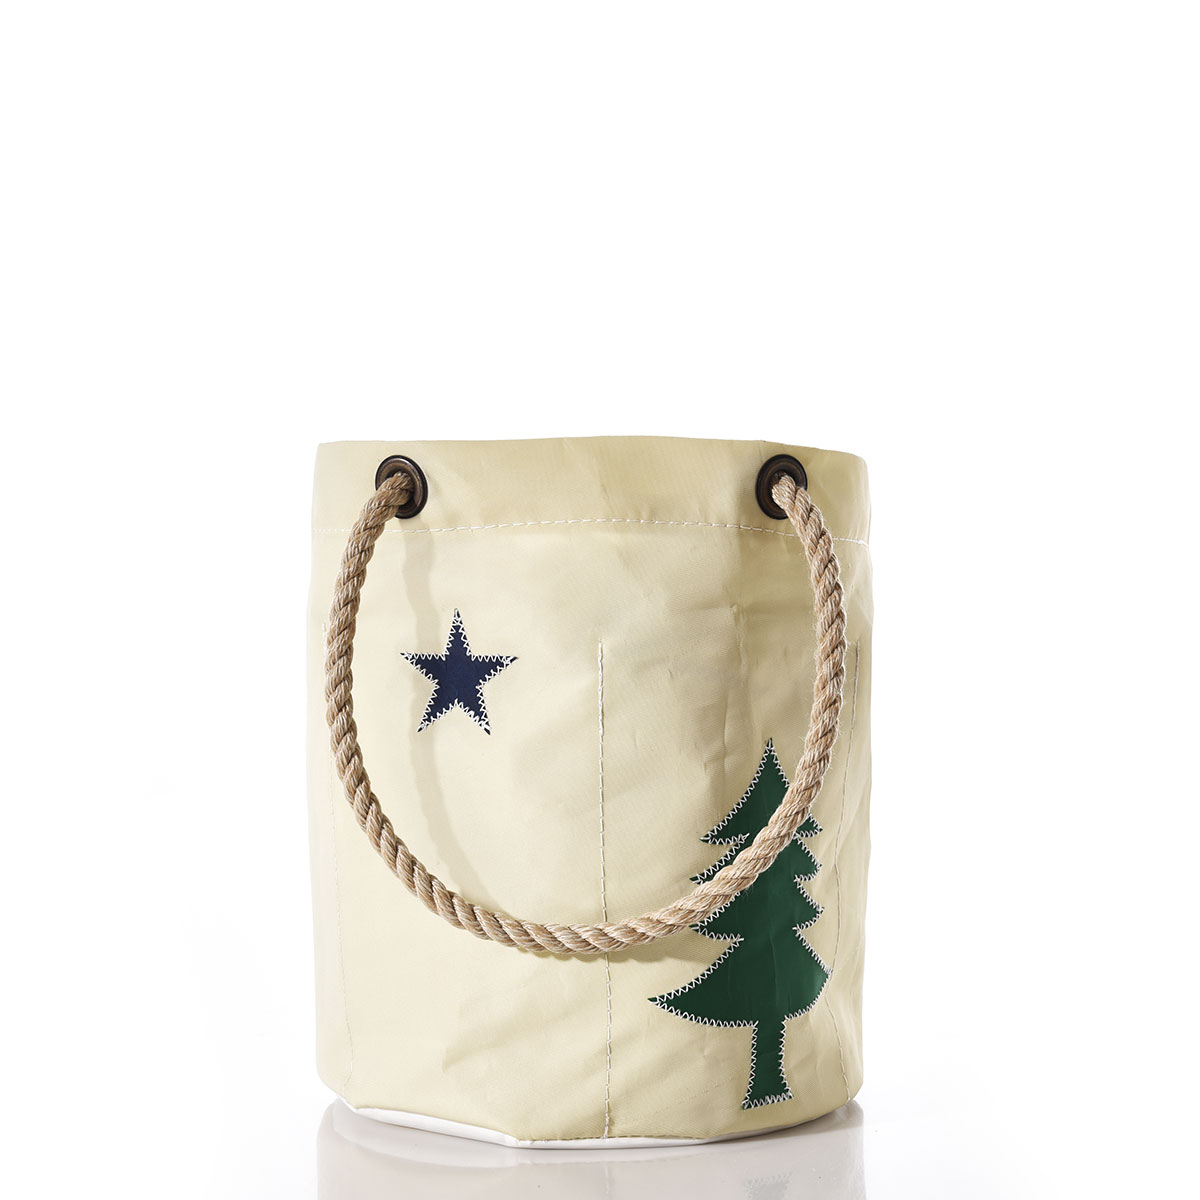 recycled sail cloth beverage bucket featuring a navy star and green pine tree from Maine's original state flag, with hemp rope handles